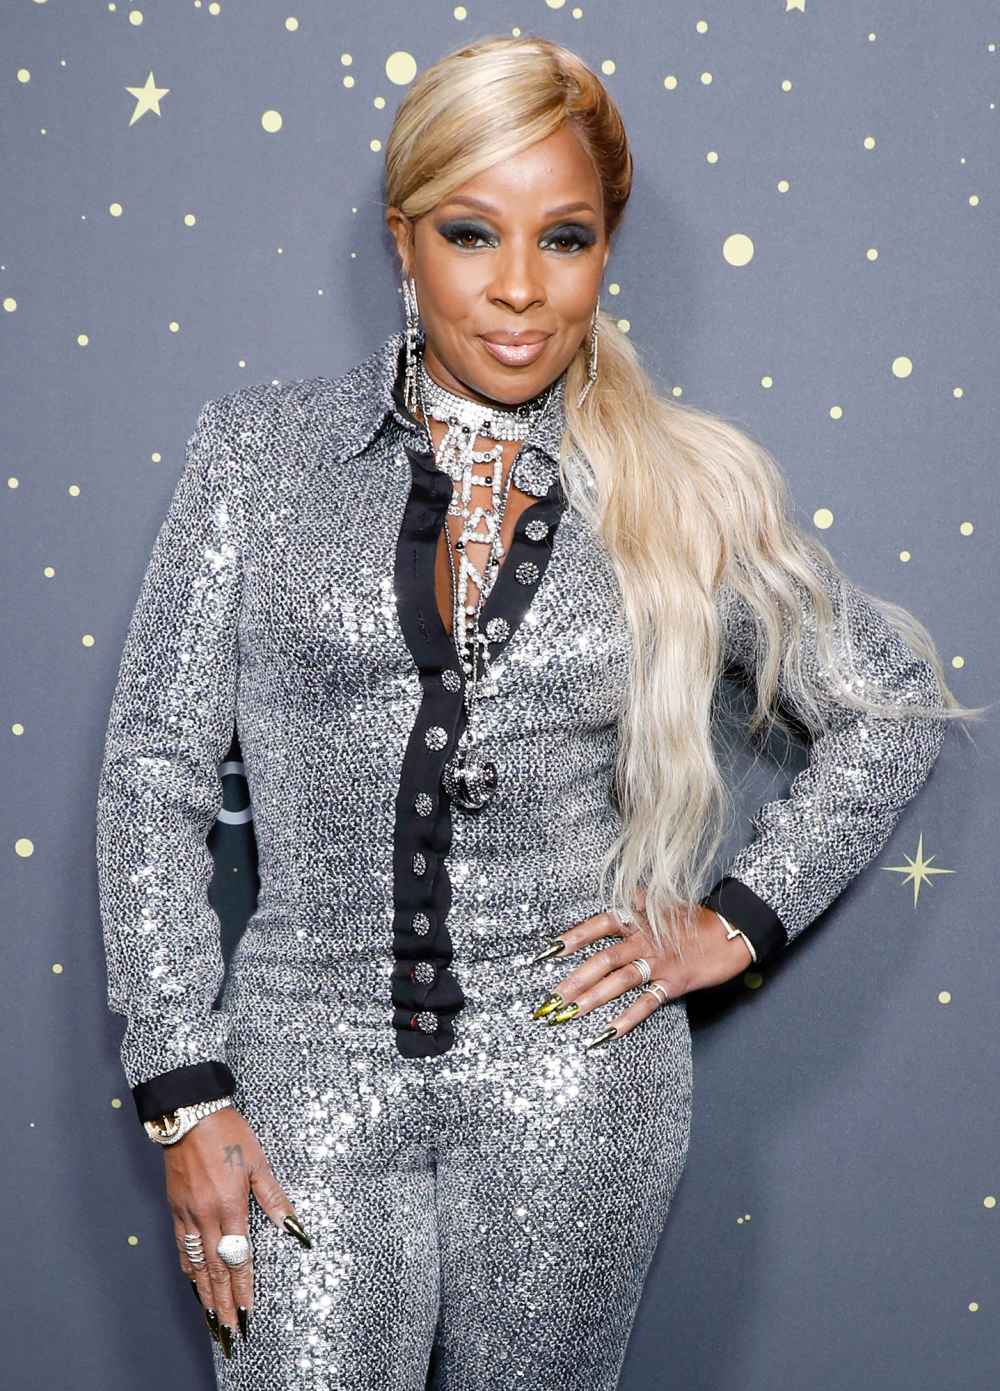 Mary J Blige's wearing thigh high boots